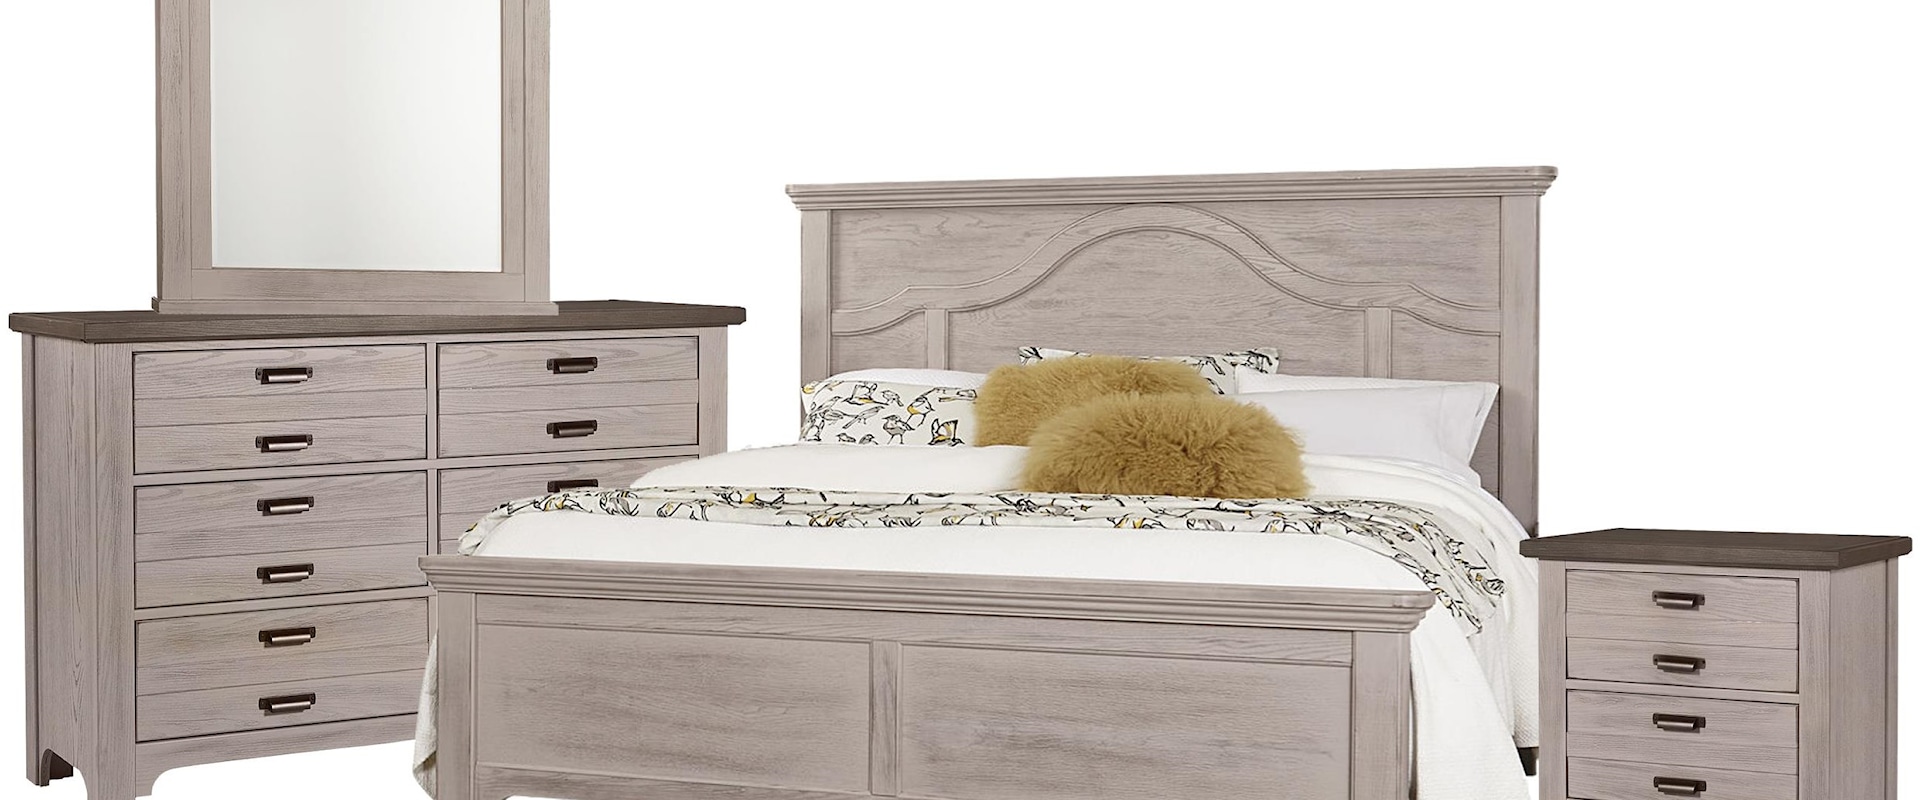 King Mantel Bed, Double Dresser, Arch Mirror, 2 Drawer Nightstand